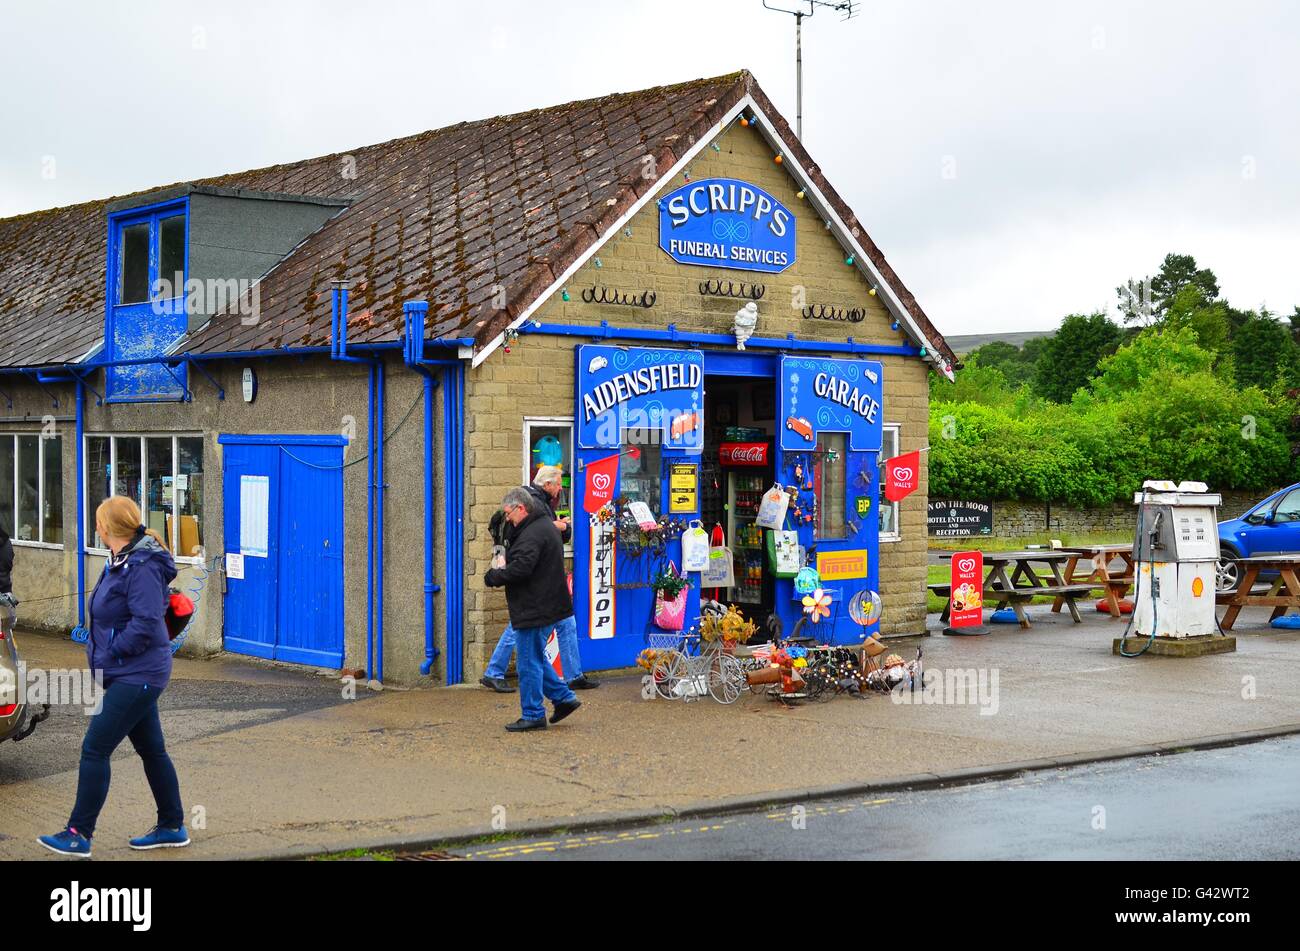 Scripps Garage Goathland, North Yorkshire Moors. Setting for the fictional village of Aidensfield in the TV series Heartbeat. Stock Photo